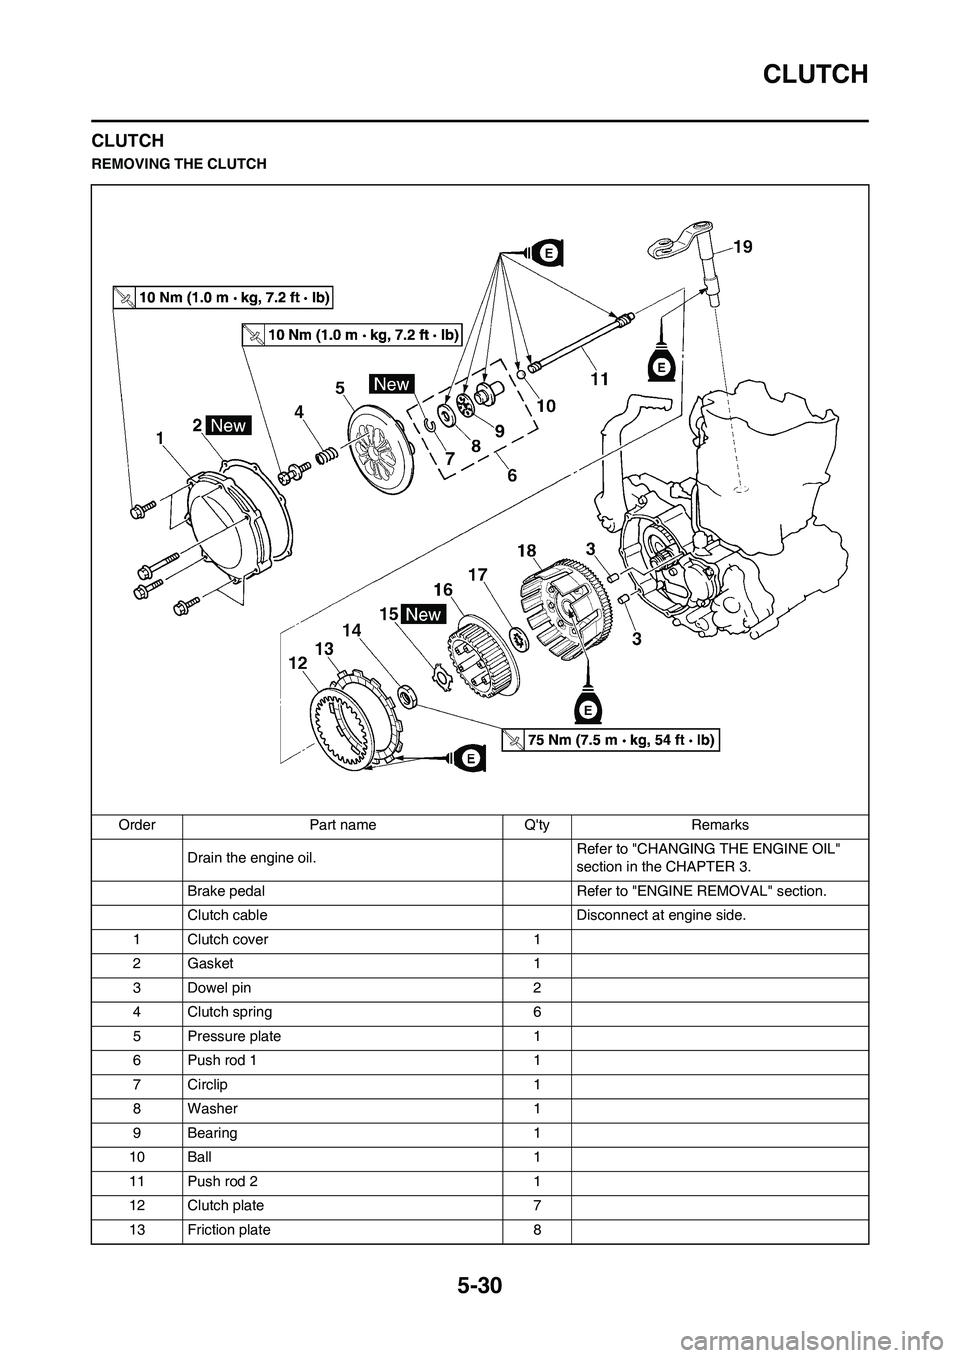 YAMAHA WR 450F 2010 Owners Manual 5-30
CLUTCH
CLUTCH
REMOVING THE CLUTCH
Order Part name Qty Remarks
Drain the engine oil. Refer to "CHANGING THE ENGINE OIL" 
section in the CHAPTER 3.
Brake pedal  Refer to "ENGINE REMOVAL" section.
